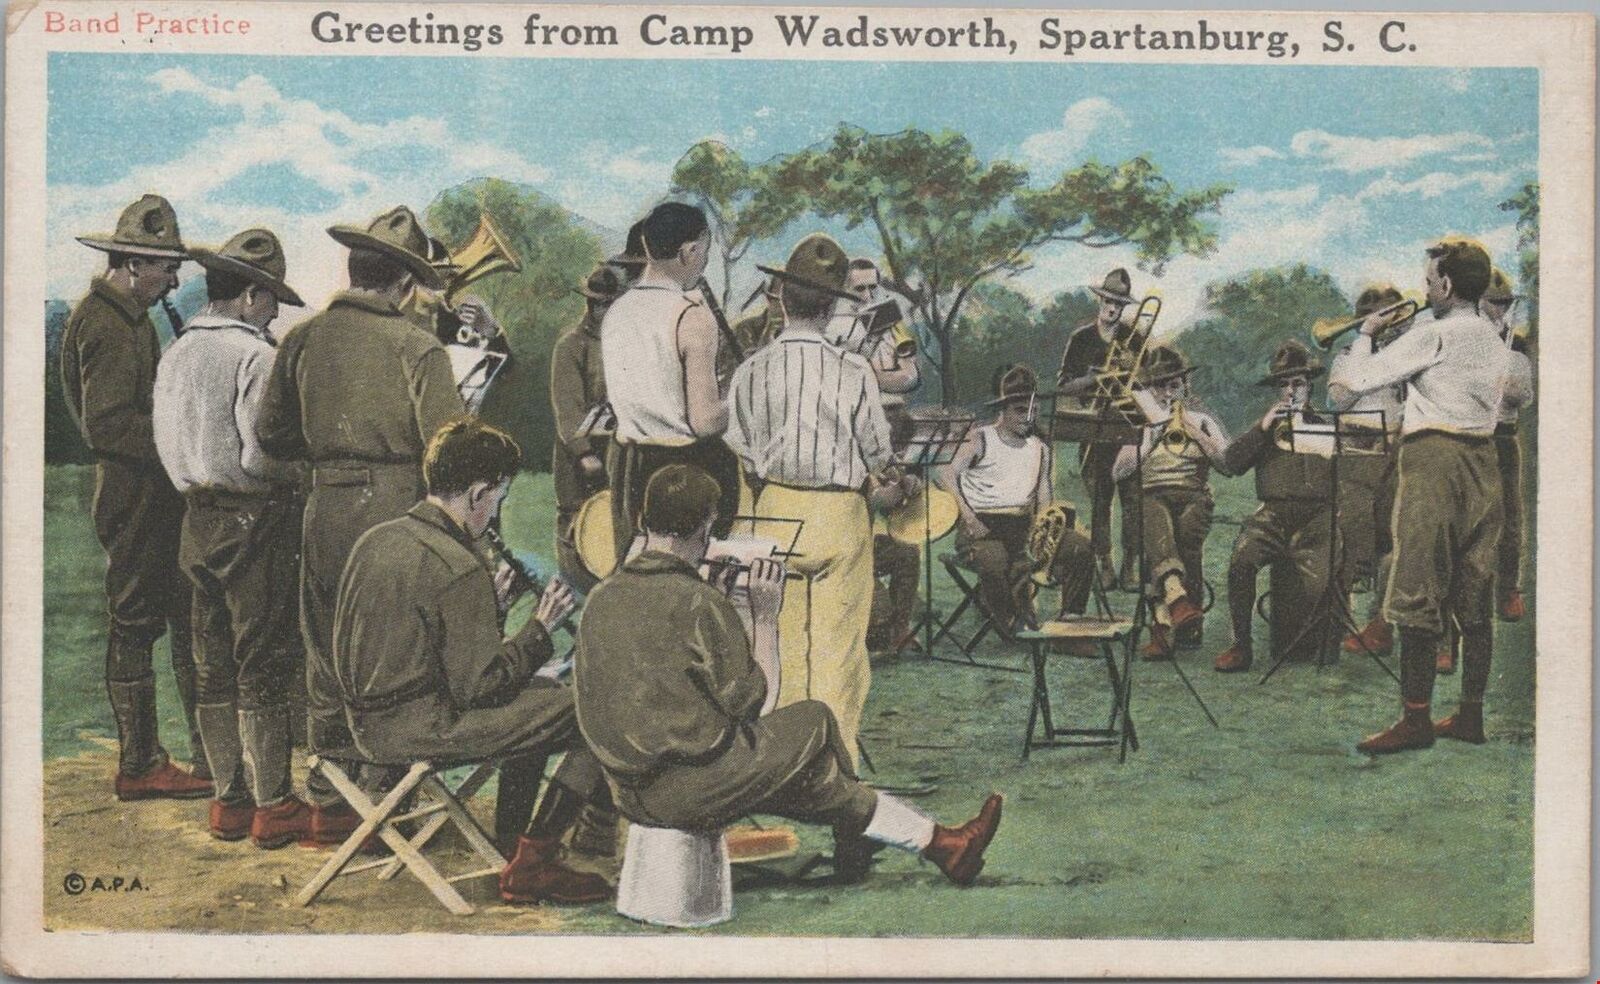 Postcard Military Band Practice Greetings from Camp Wadsworth Spartanburg SC 